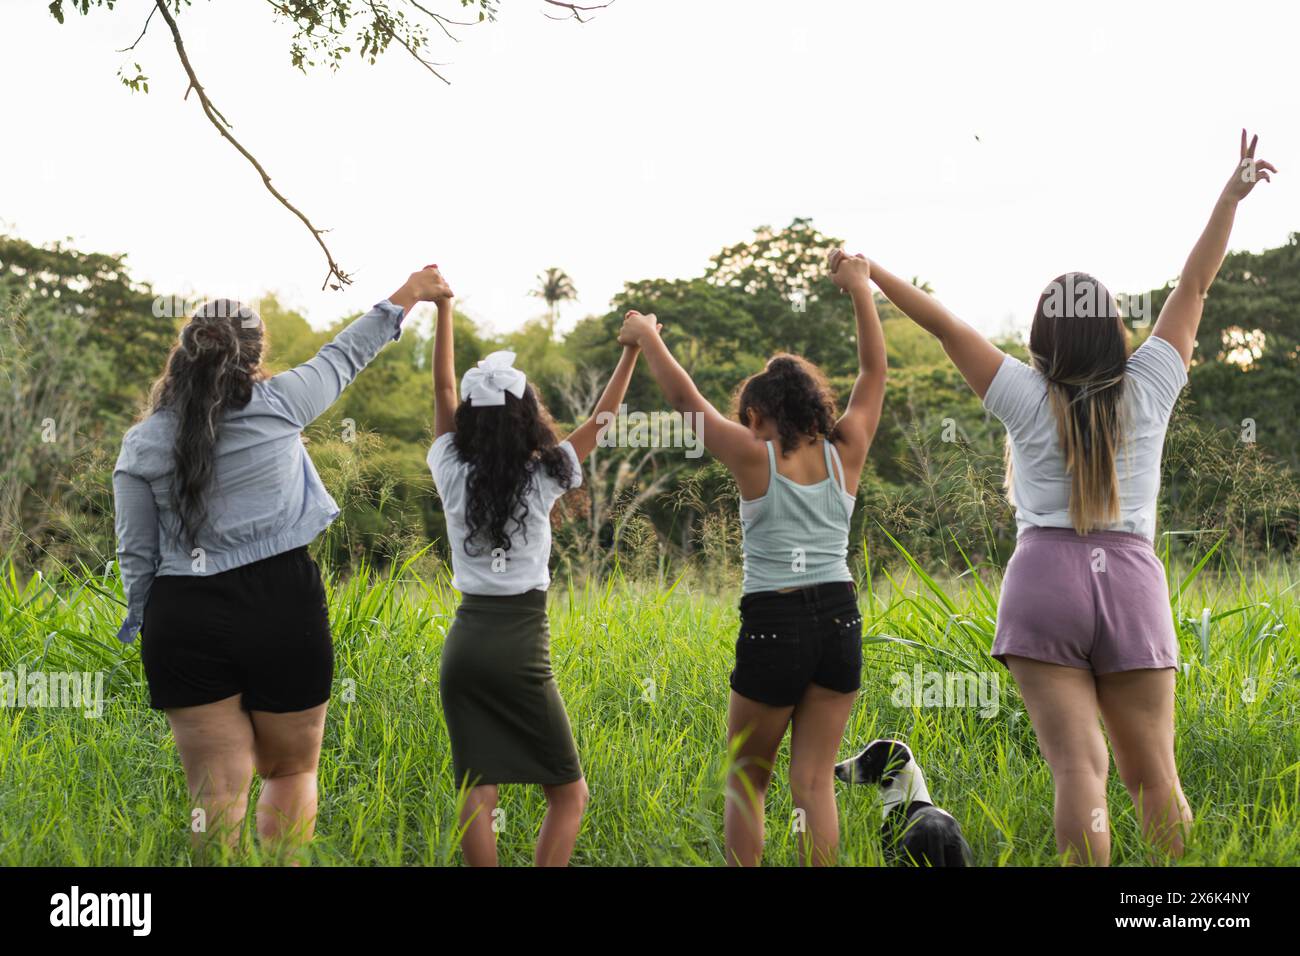 four Latina girls holding hands as they are lifted to the sky, celebrating their freedom and empowerment Stock Photo